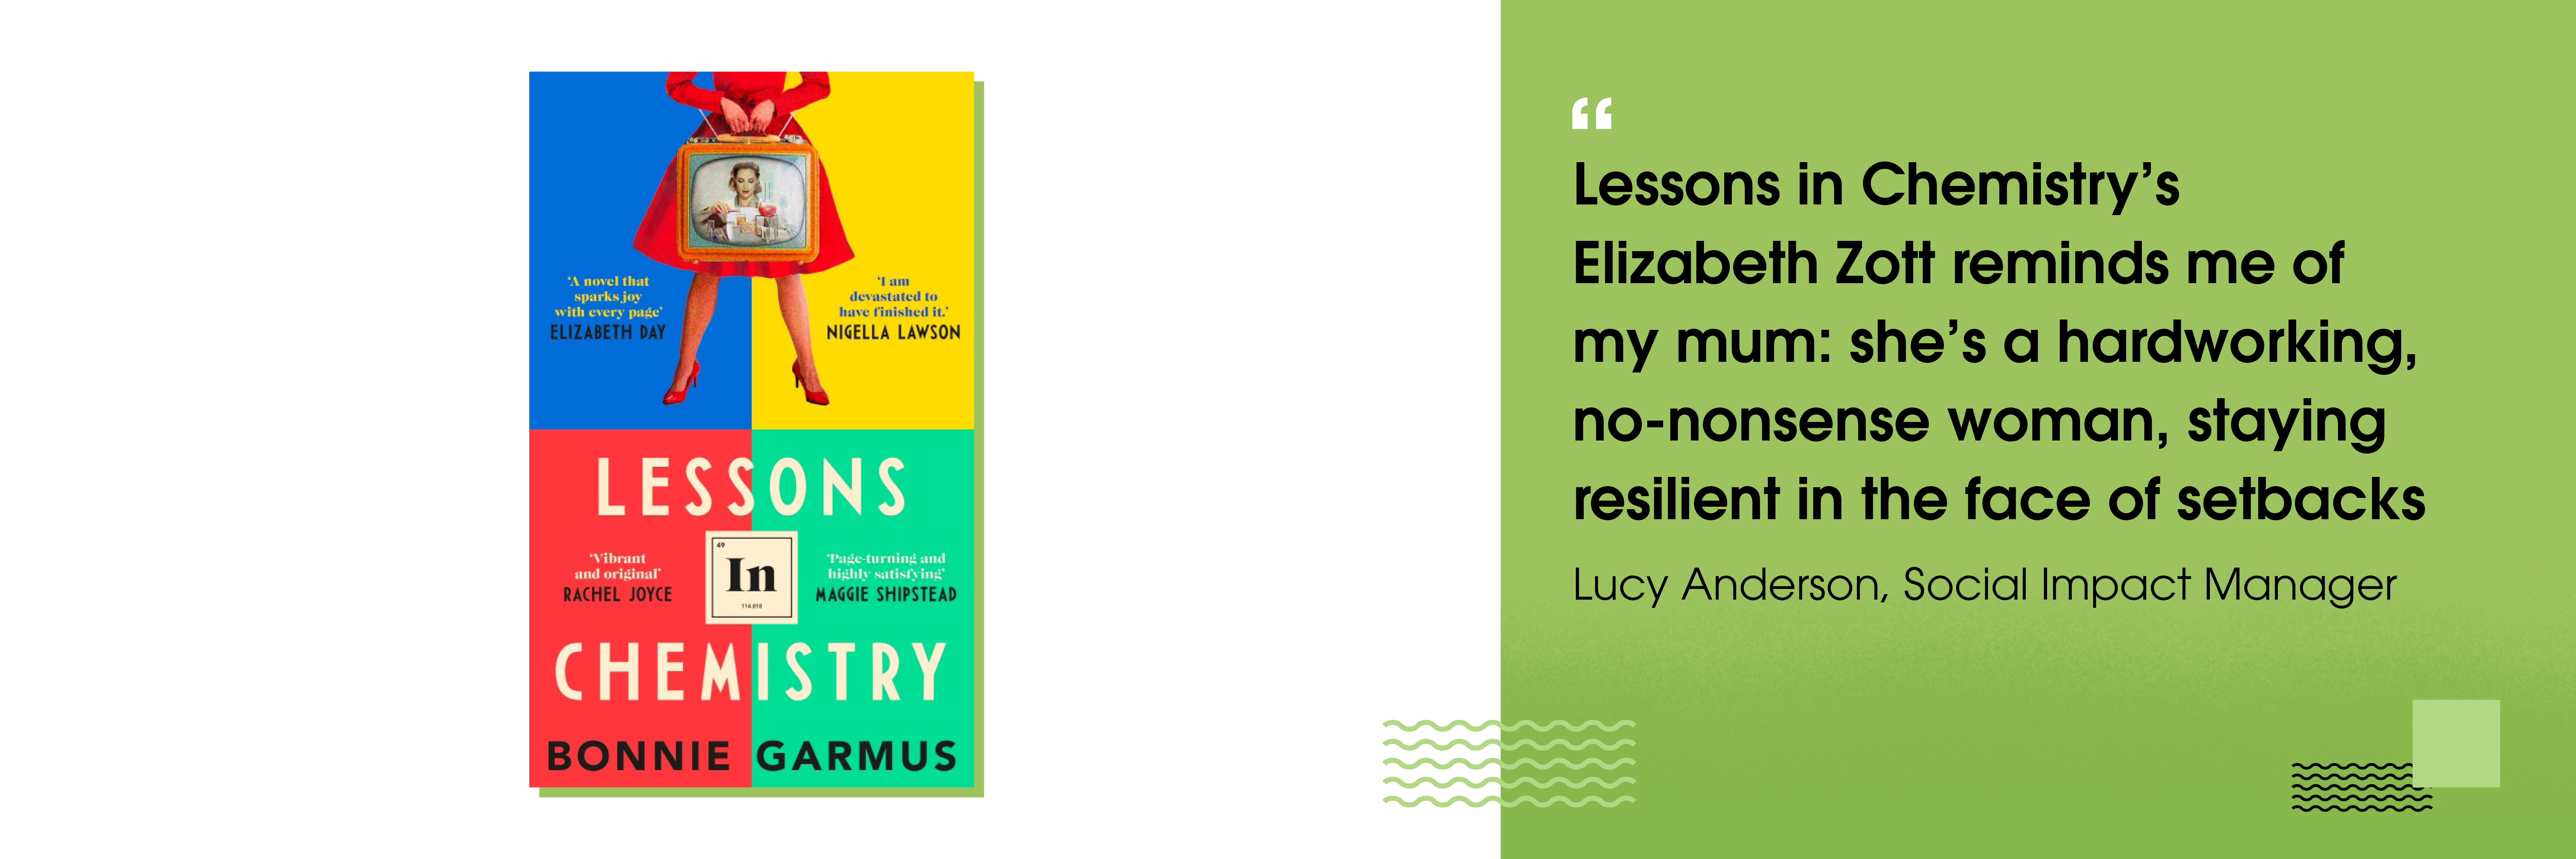 A pictorial quote about Bonnie Garmus's book Lessons in Chemistry, on a green background next to the book's cover